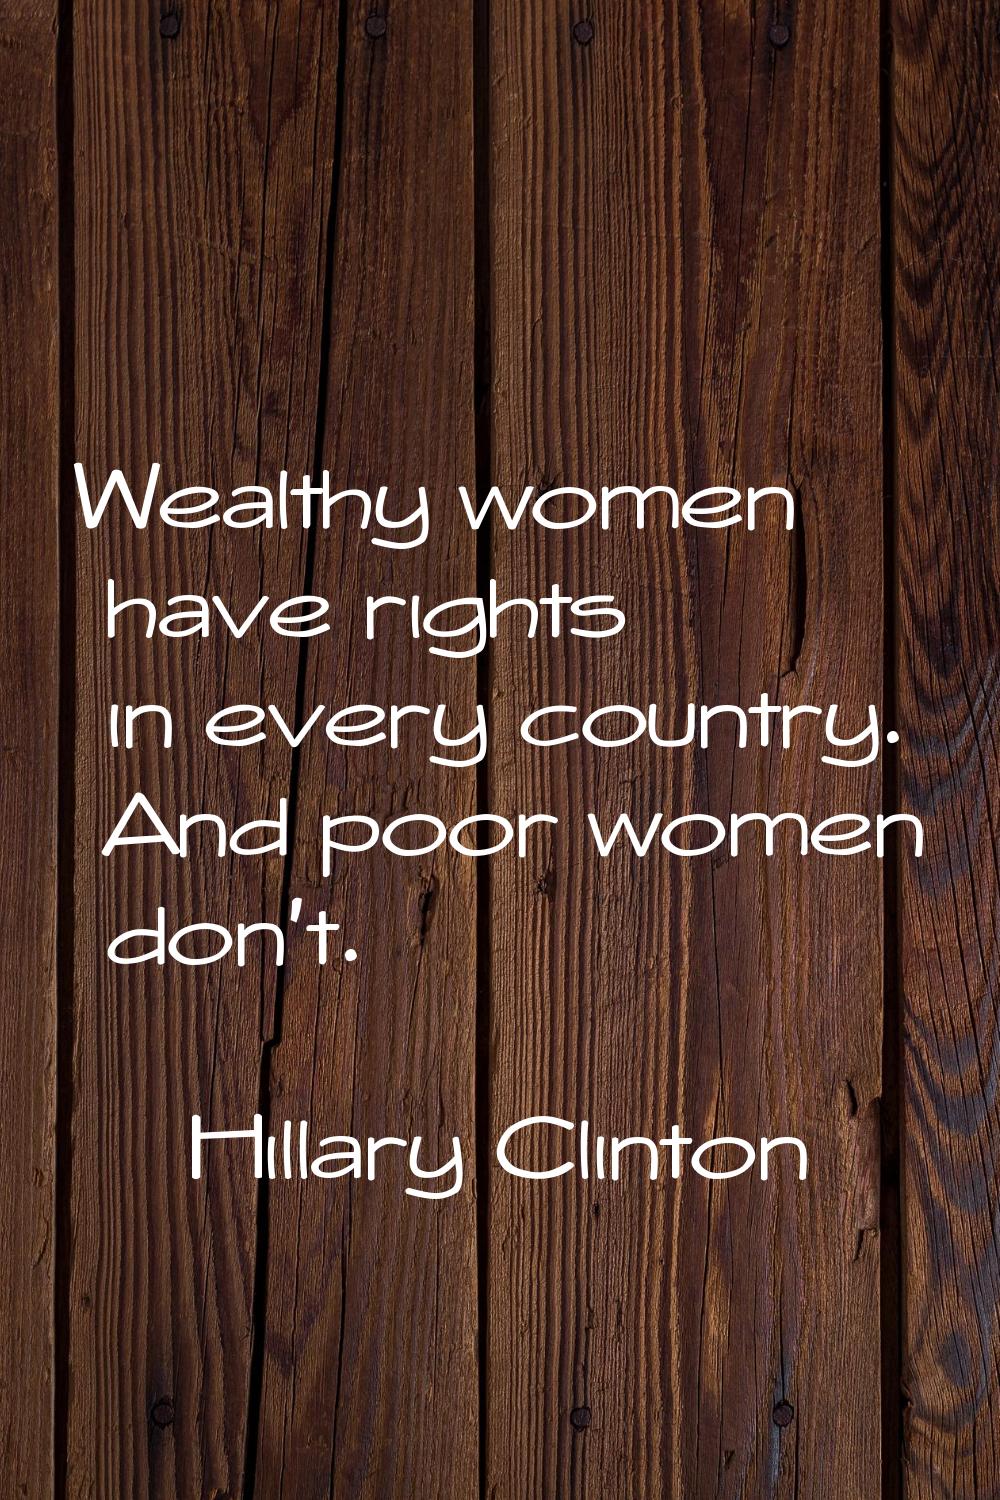 Wealthy women have rights in every country. And poor women don't.